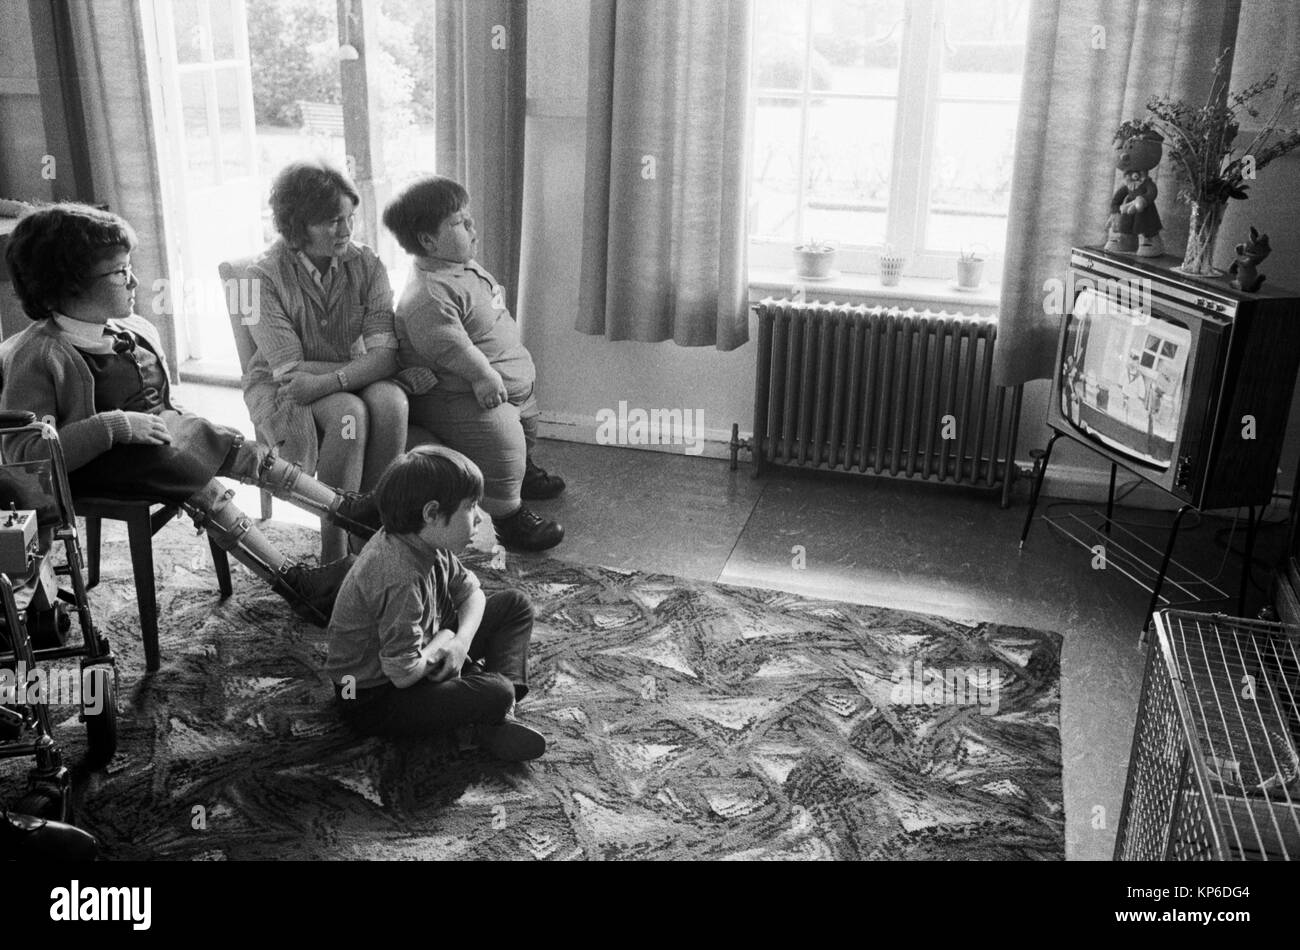 Children and carer watching TV at Elmfield School a National Children's Home a specialist school for children with physical disabilities  1970s Uk. Harpenden, Hertfordshire, England 1975 HOMER SYKES Stock Photo